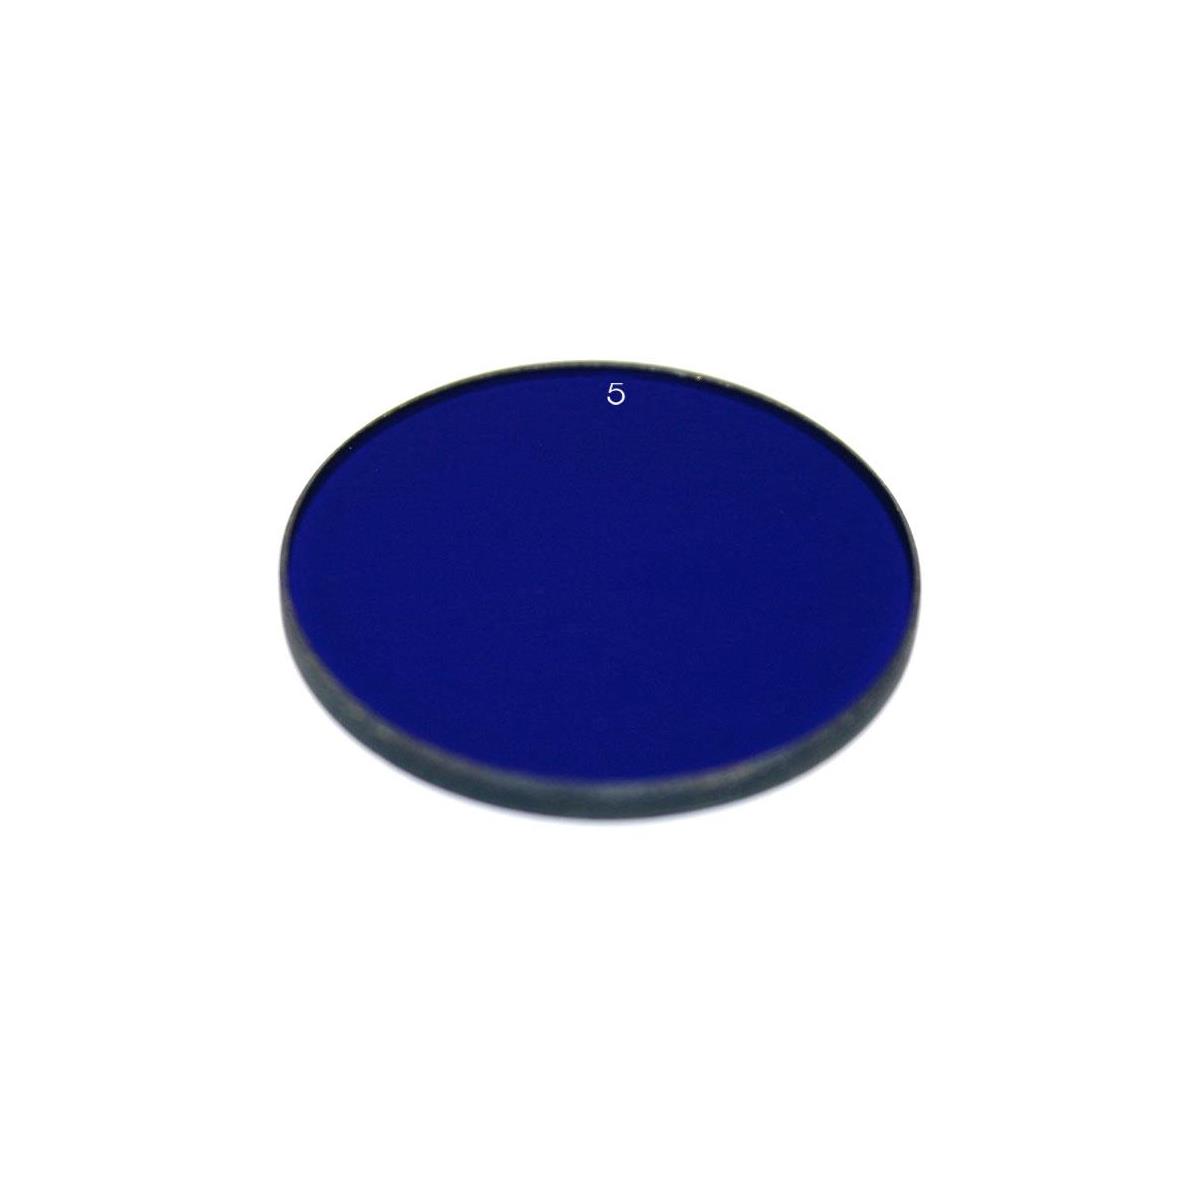 Image of Tiffen Replacement Glass for #5 Viewing Filter for Blue Screen